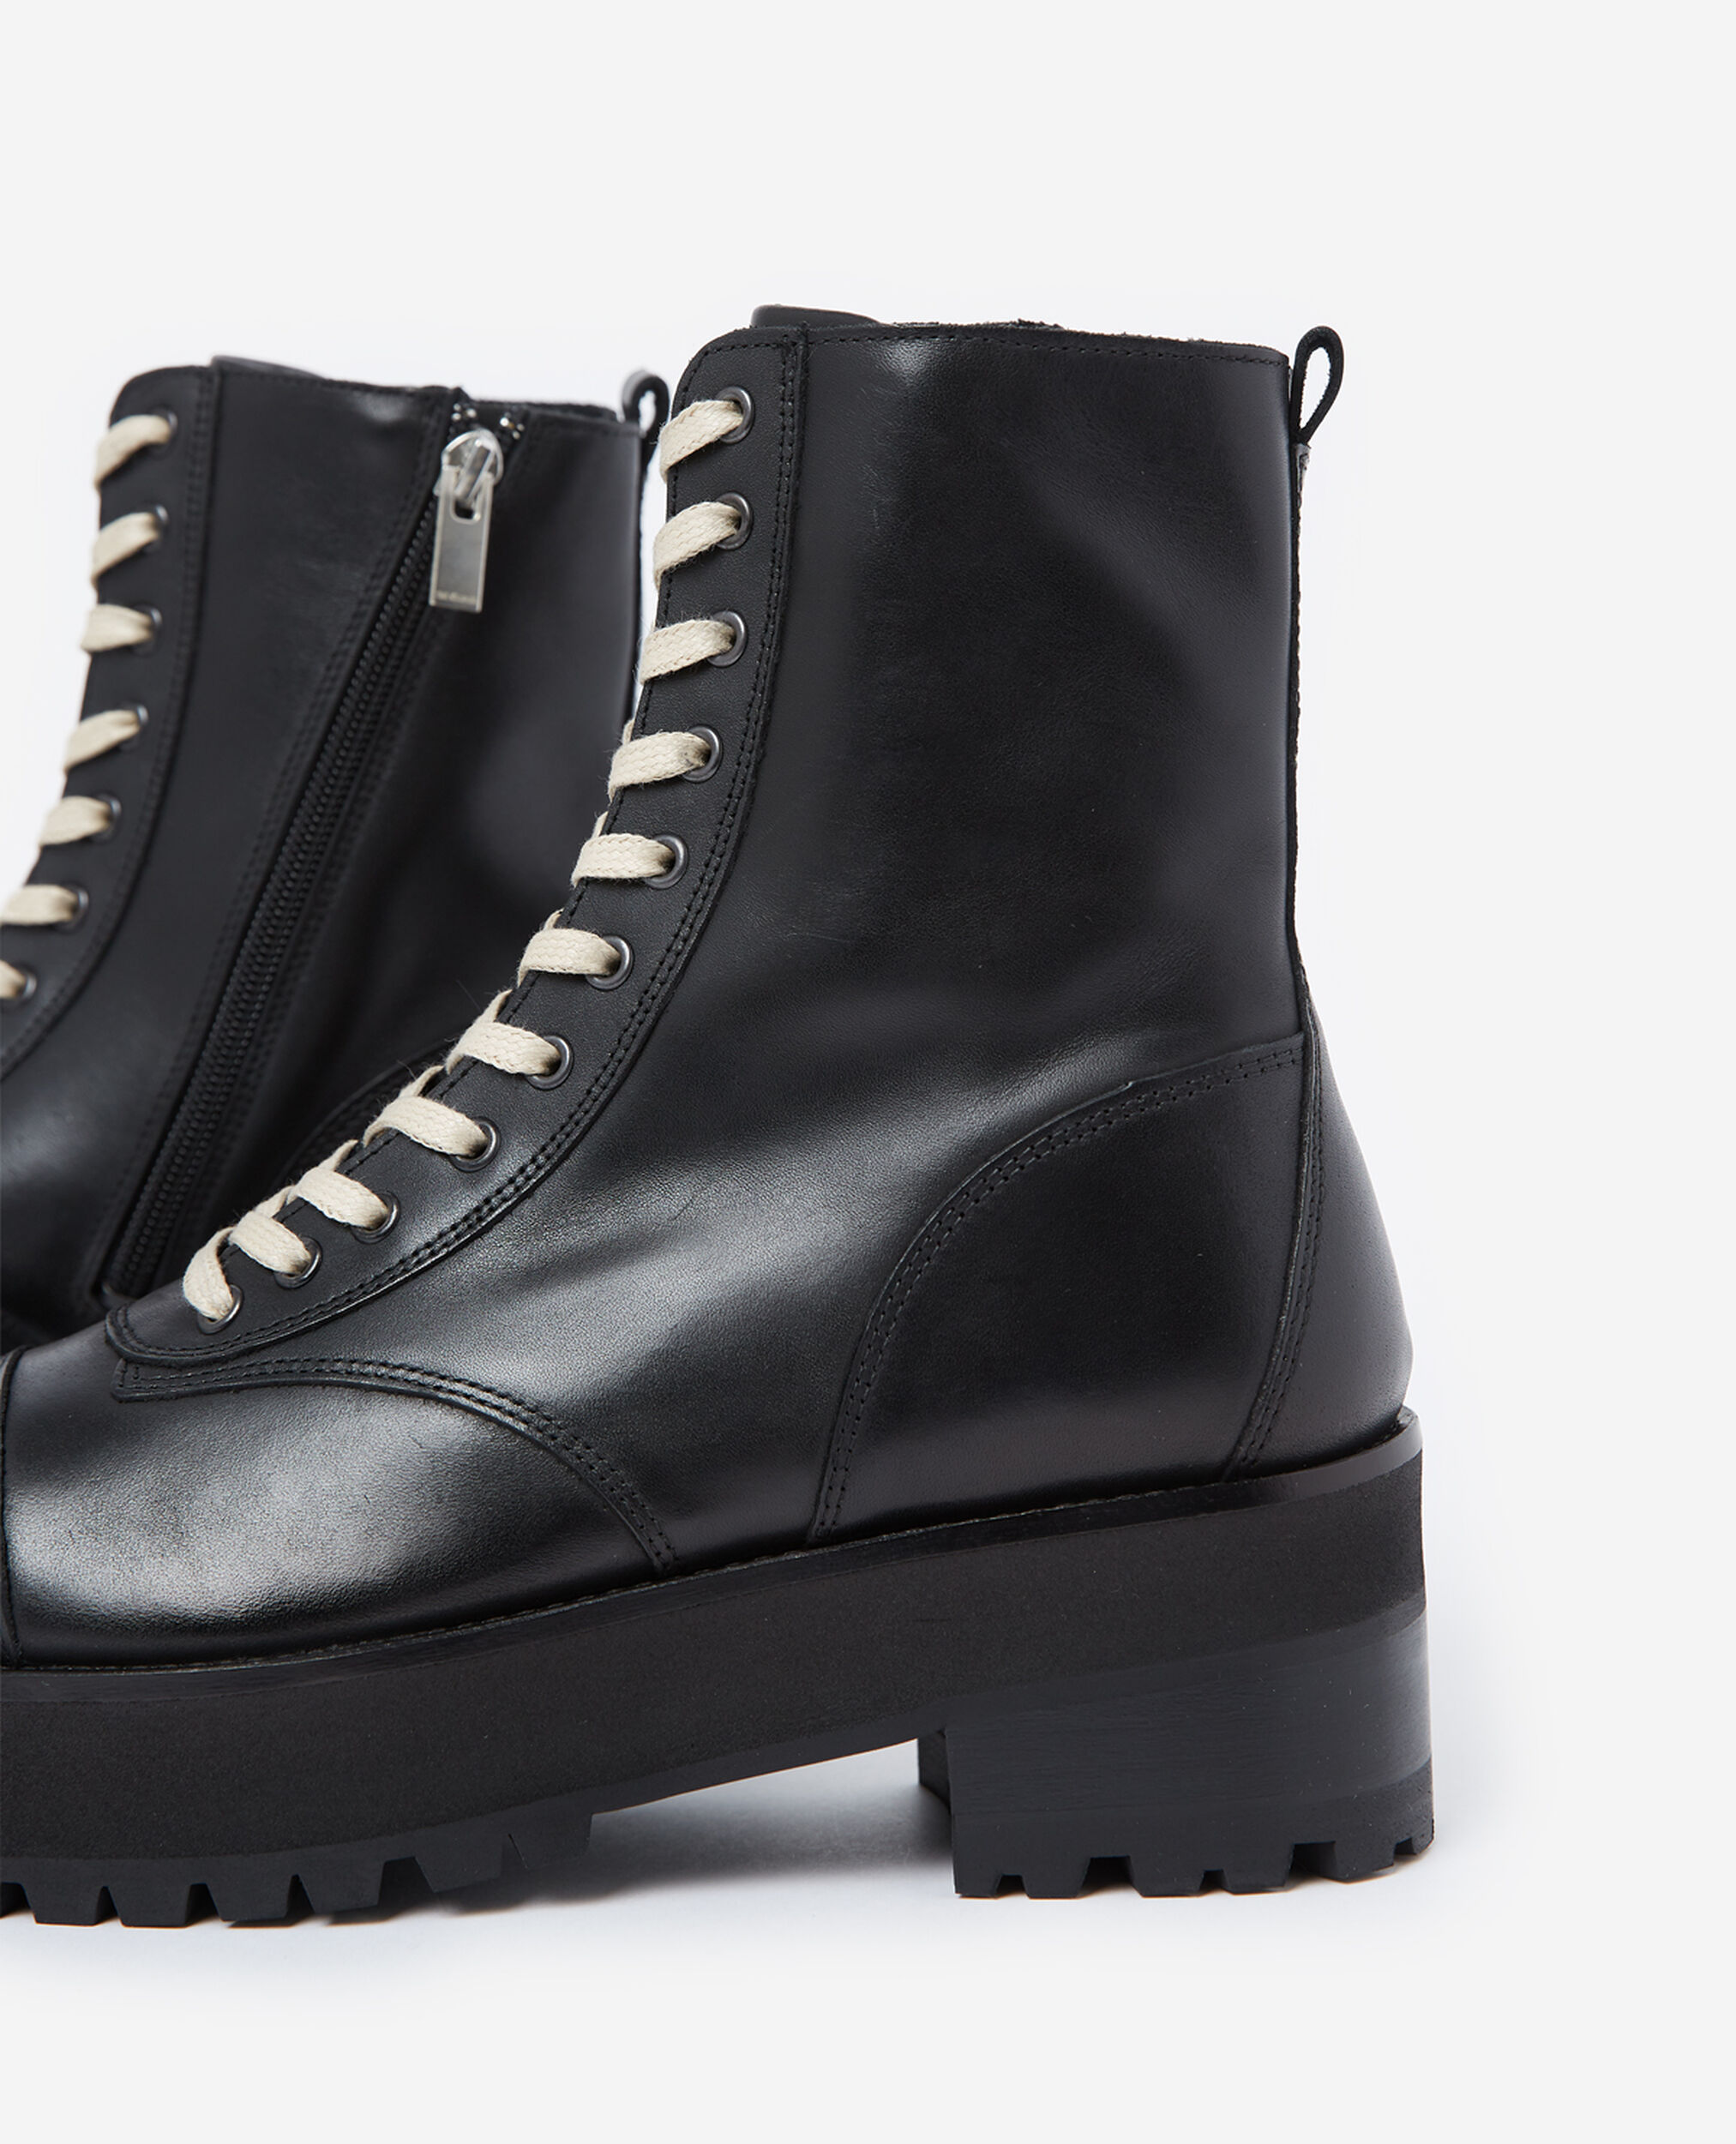 Black leather ankle boots with notched soles, BLACK, hi-res image number null